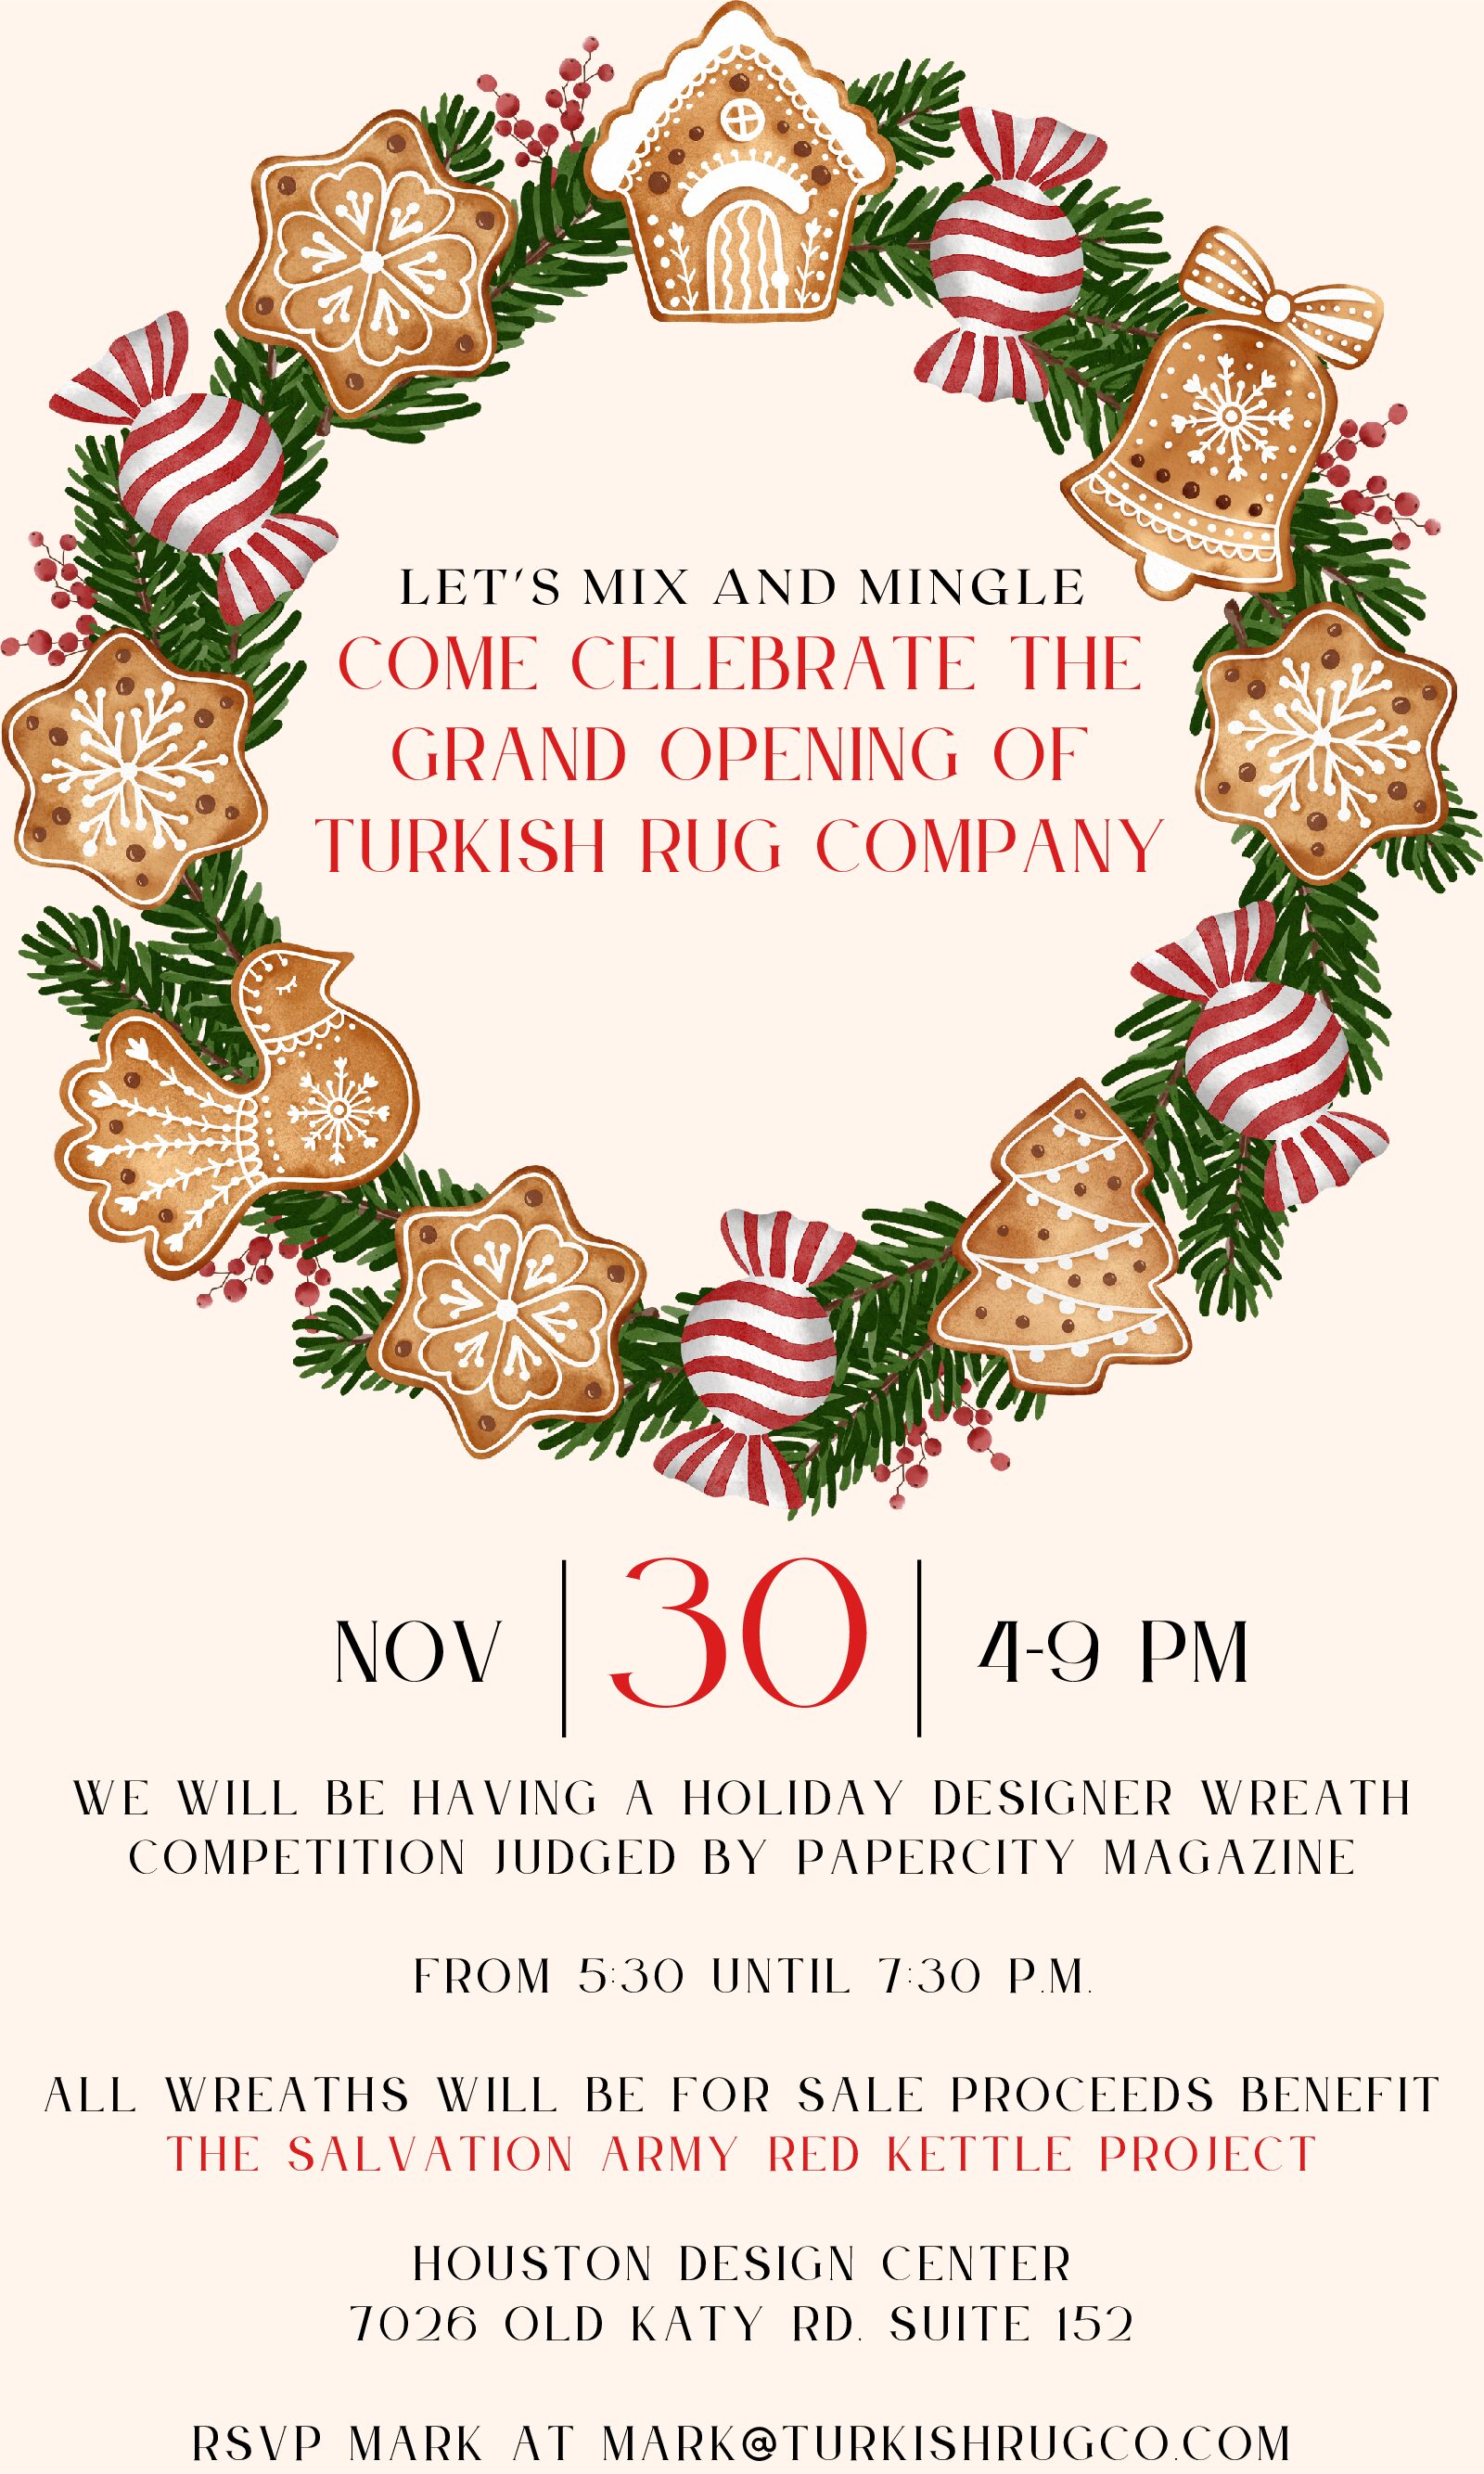 Turkish Rug Co. Grand Opening + Wreath Competition 1